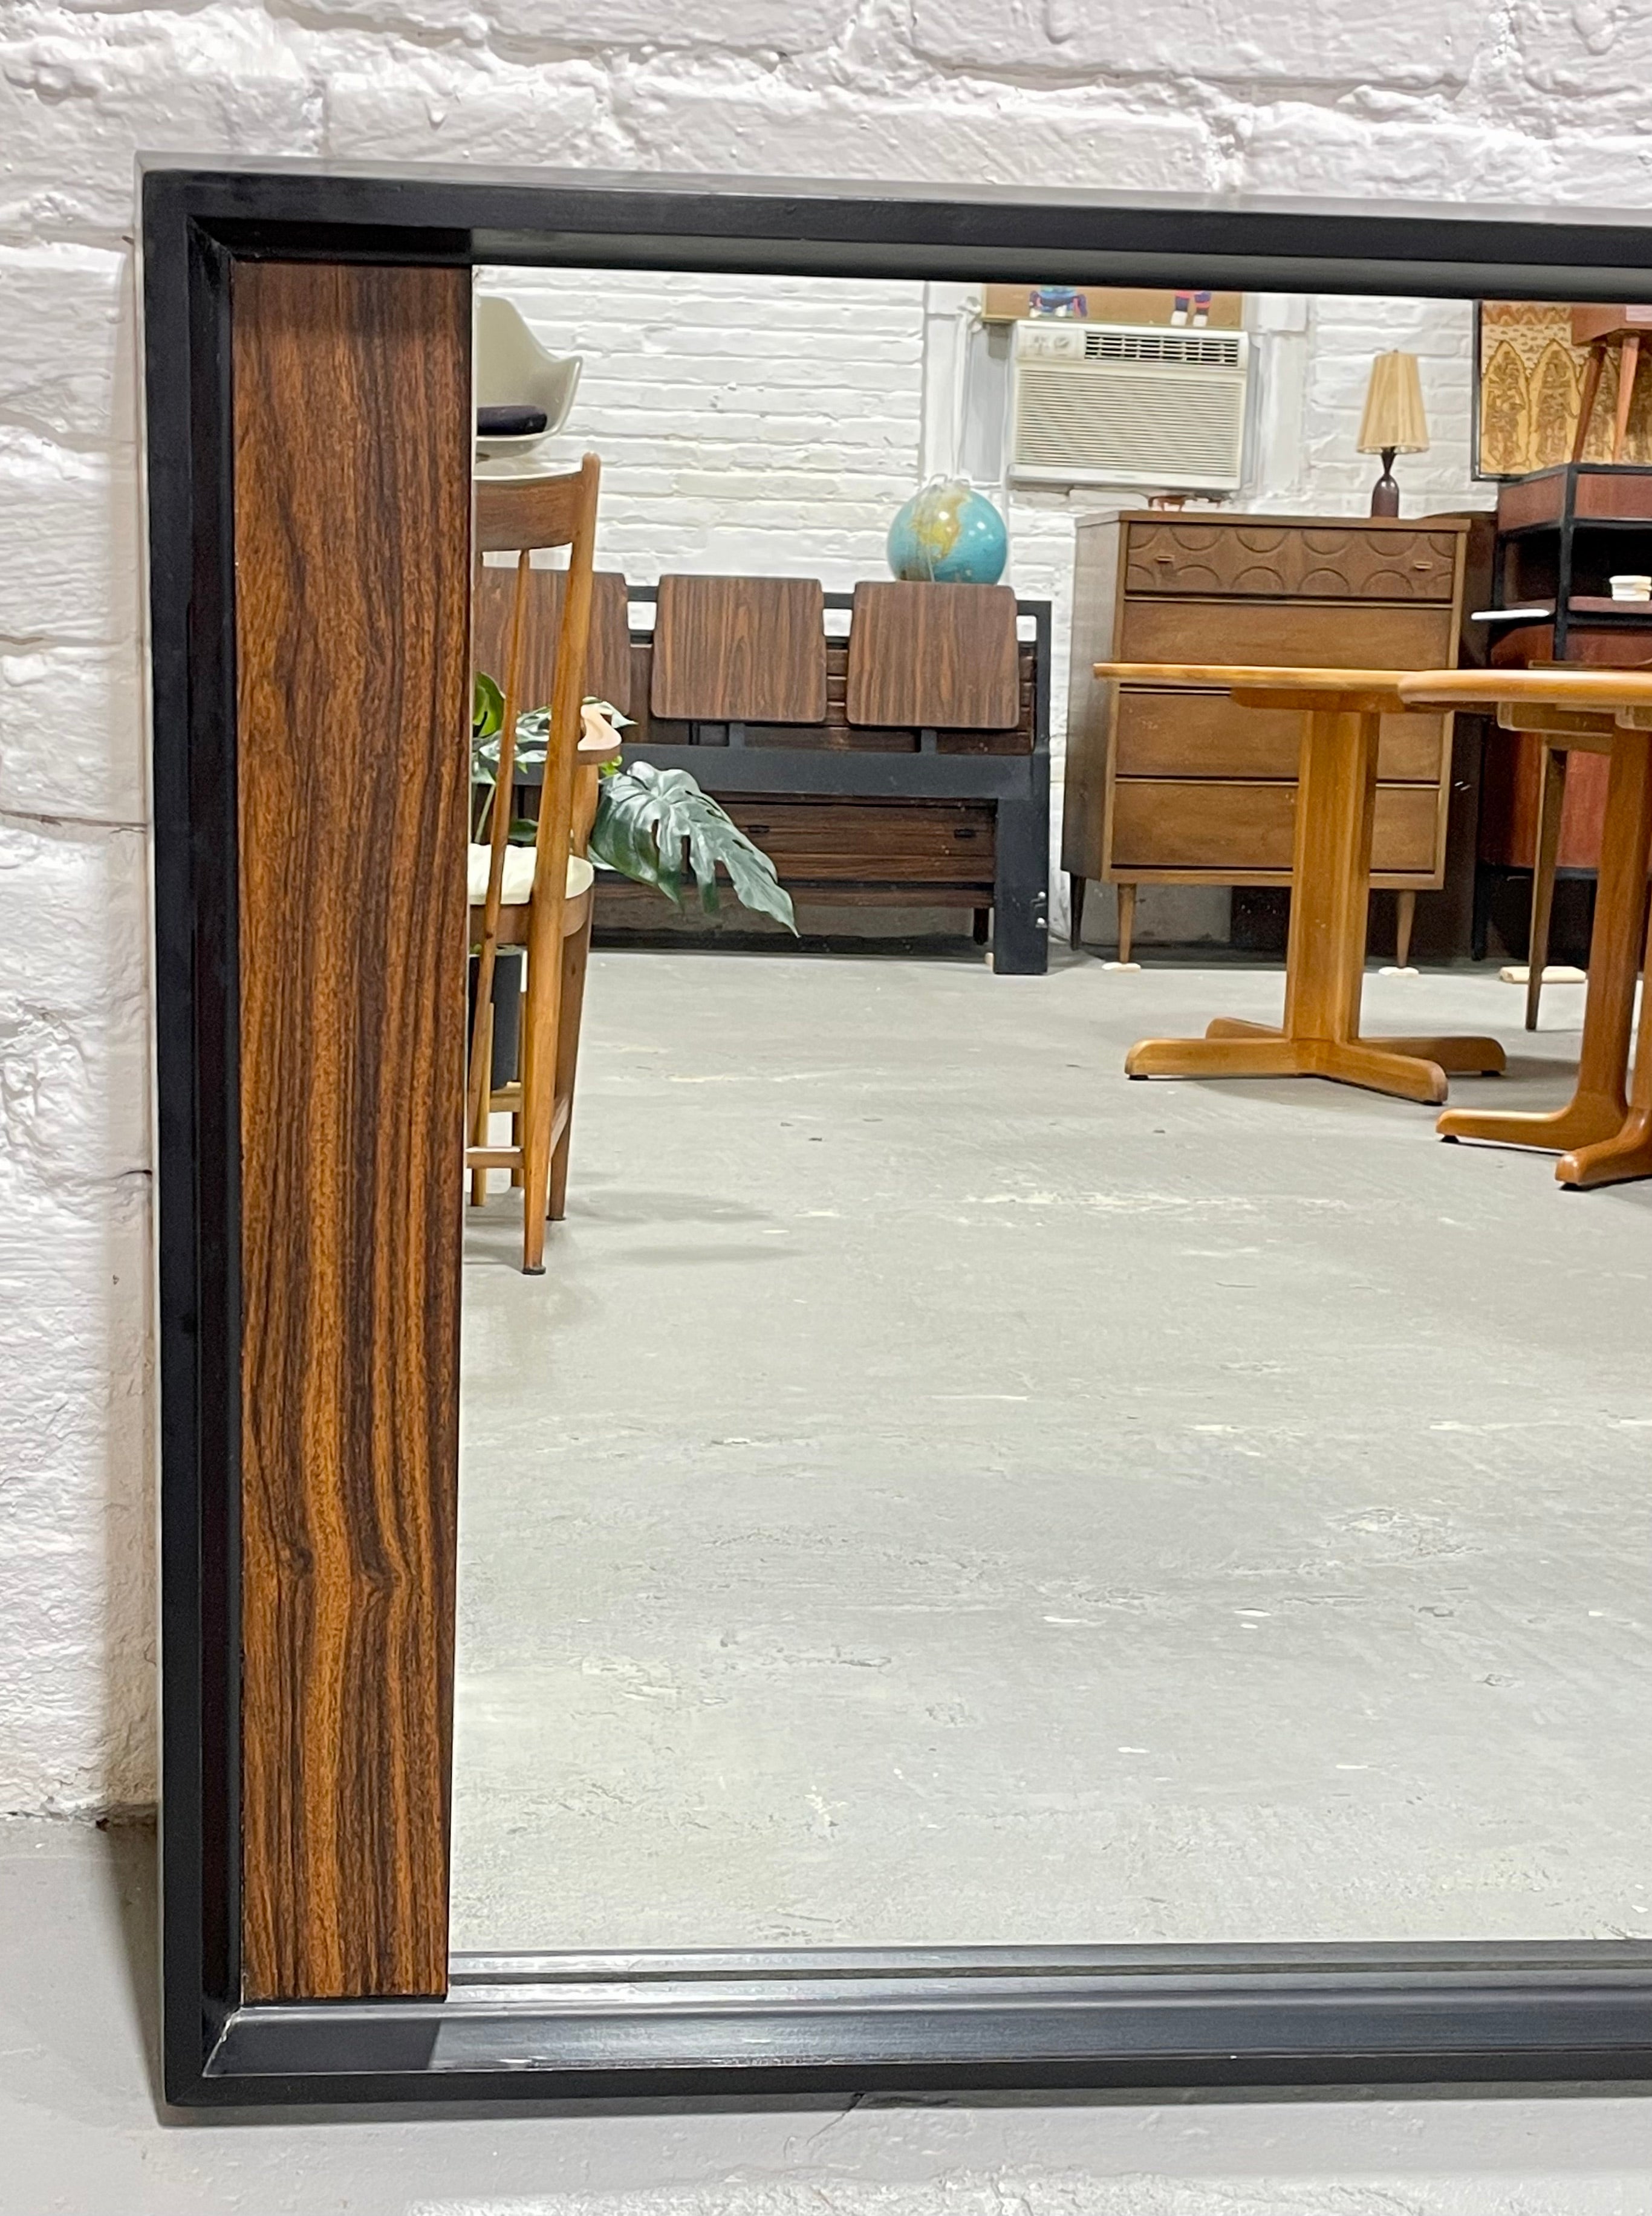 Vintage Mid Century MODERN Ebonized + Rosewood MIRROR by American of Martinsville, c. 1960's